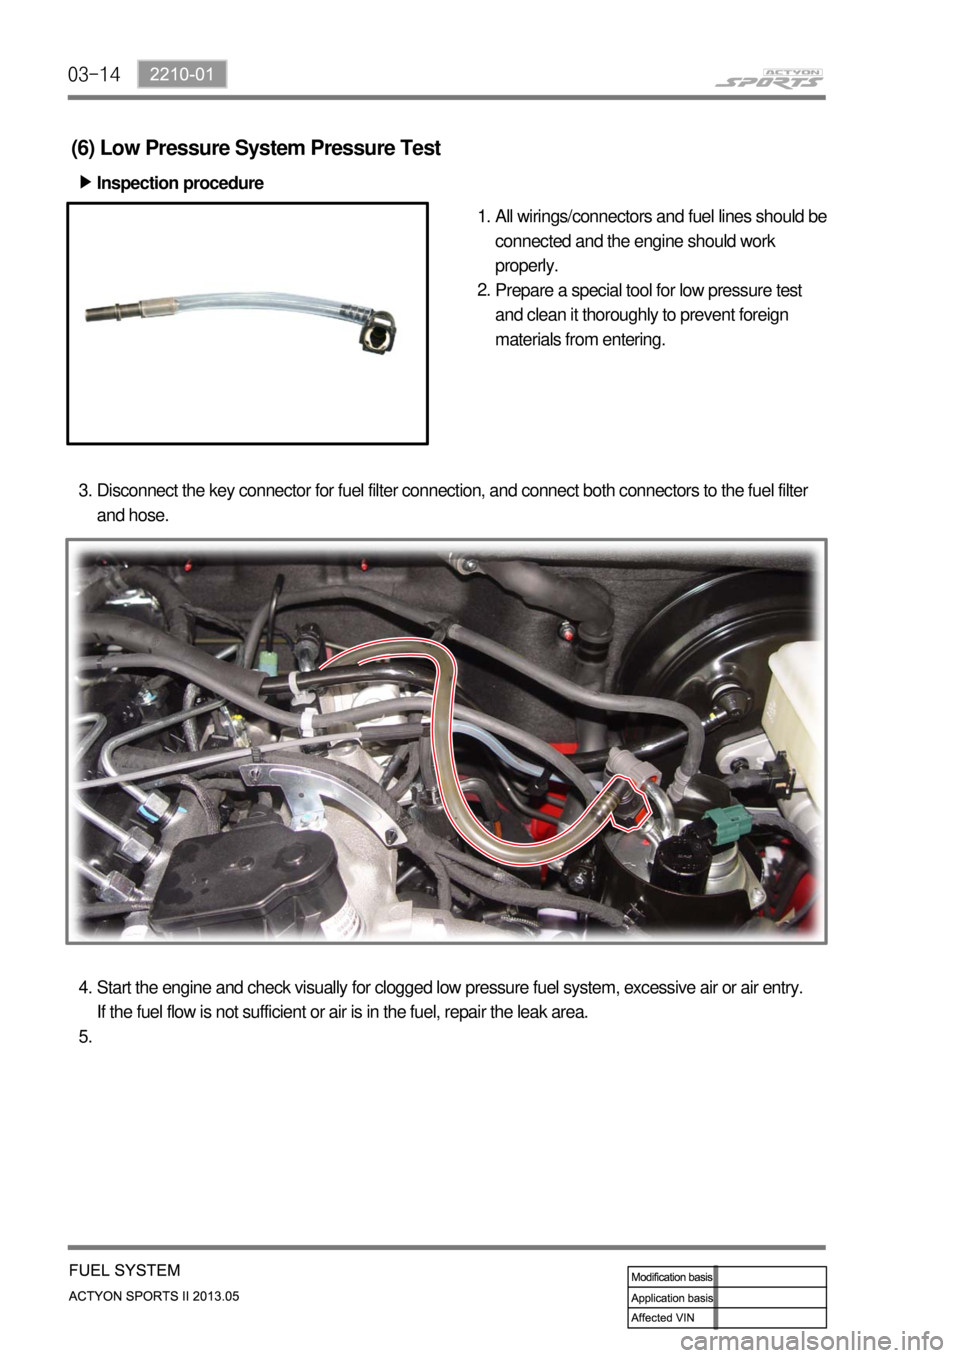 SSANGYONG NEW ACTYON SPORTS 2013  Service Manual 03-14
(6) Low Pressure System Pressure Test
Inspection procedure ▶
All wirings/connectors and fuel lines should be 
connected and the engine should work 
properly.
Prepare a special tool for low pre